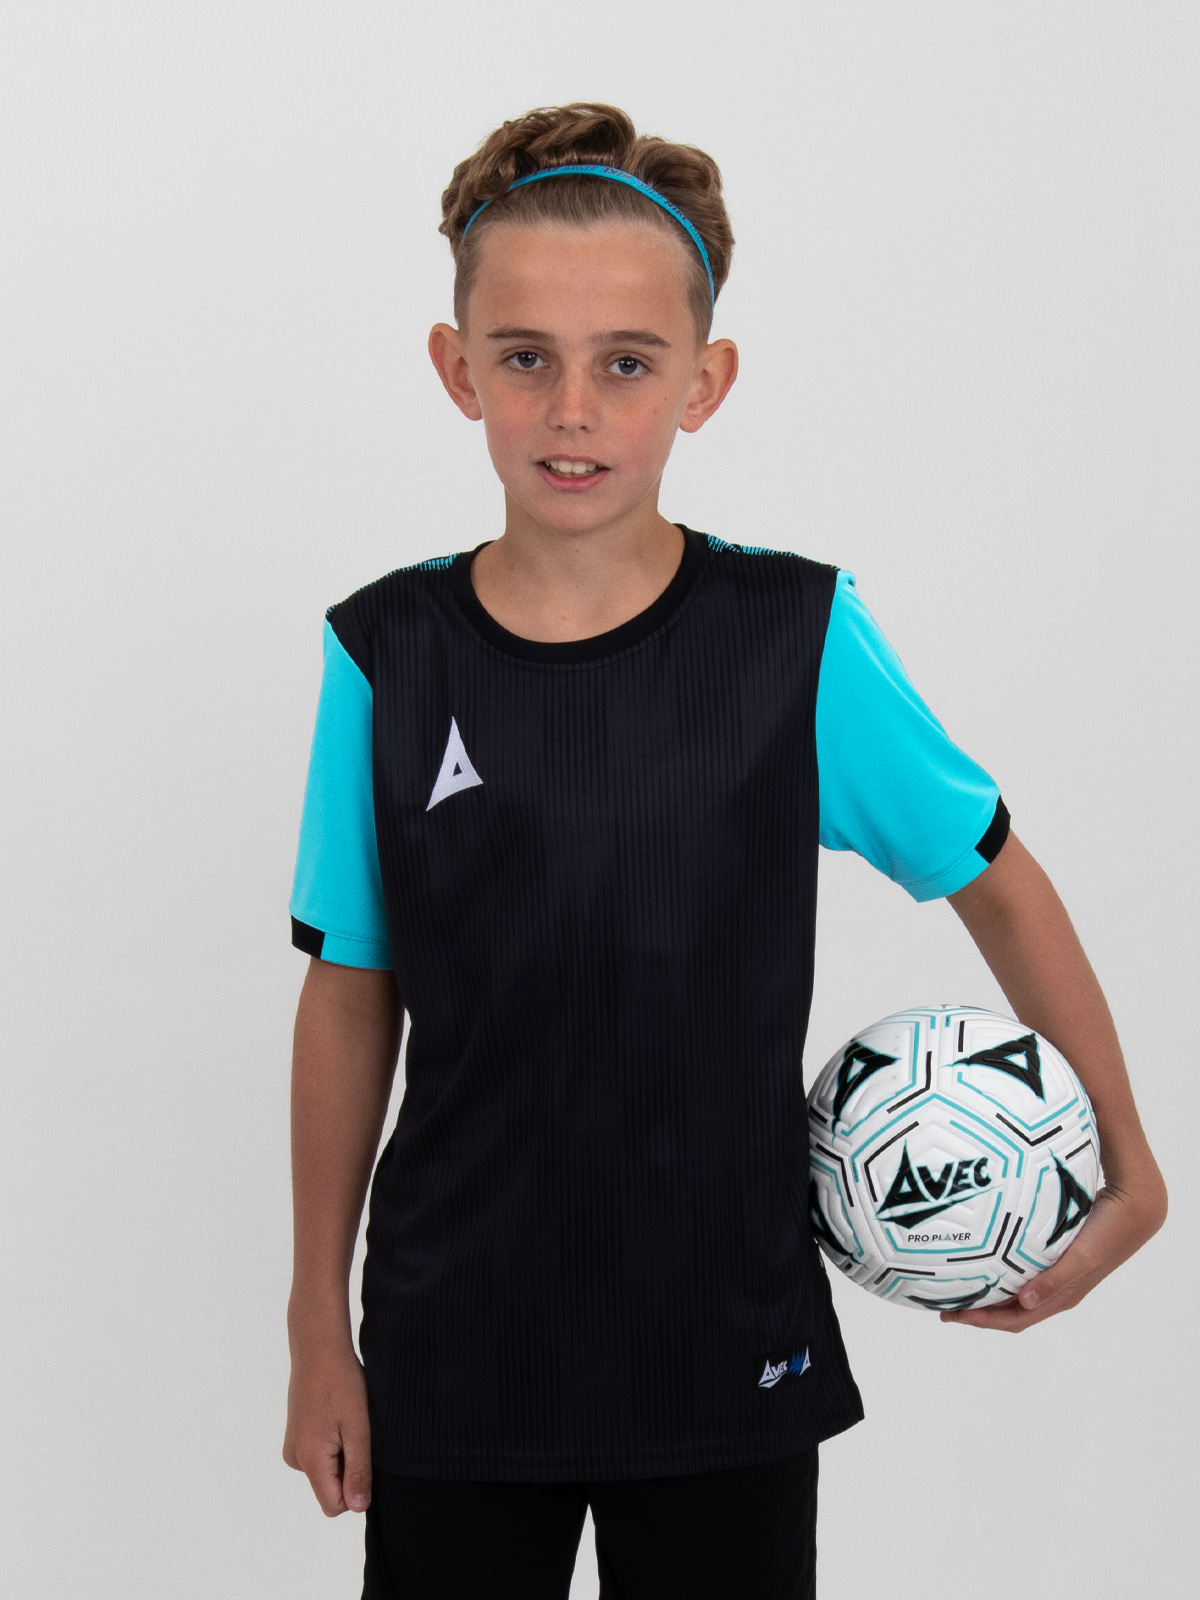 a boy is holding a size 4 football and is wearing a black football shirt with light blue sleeves